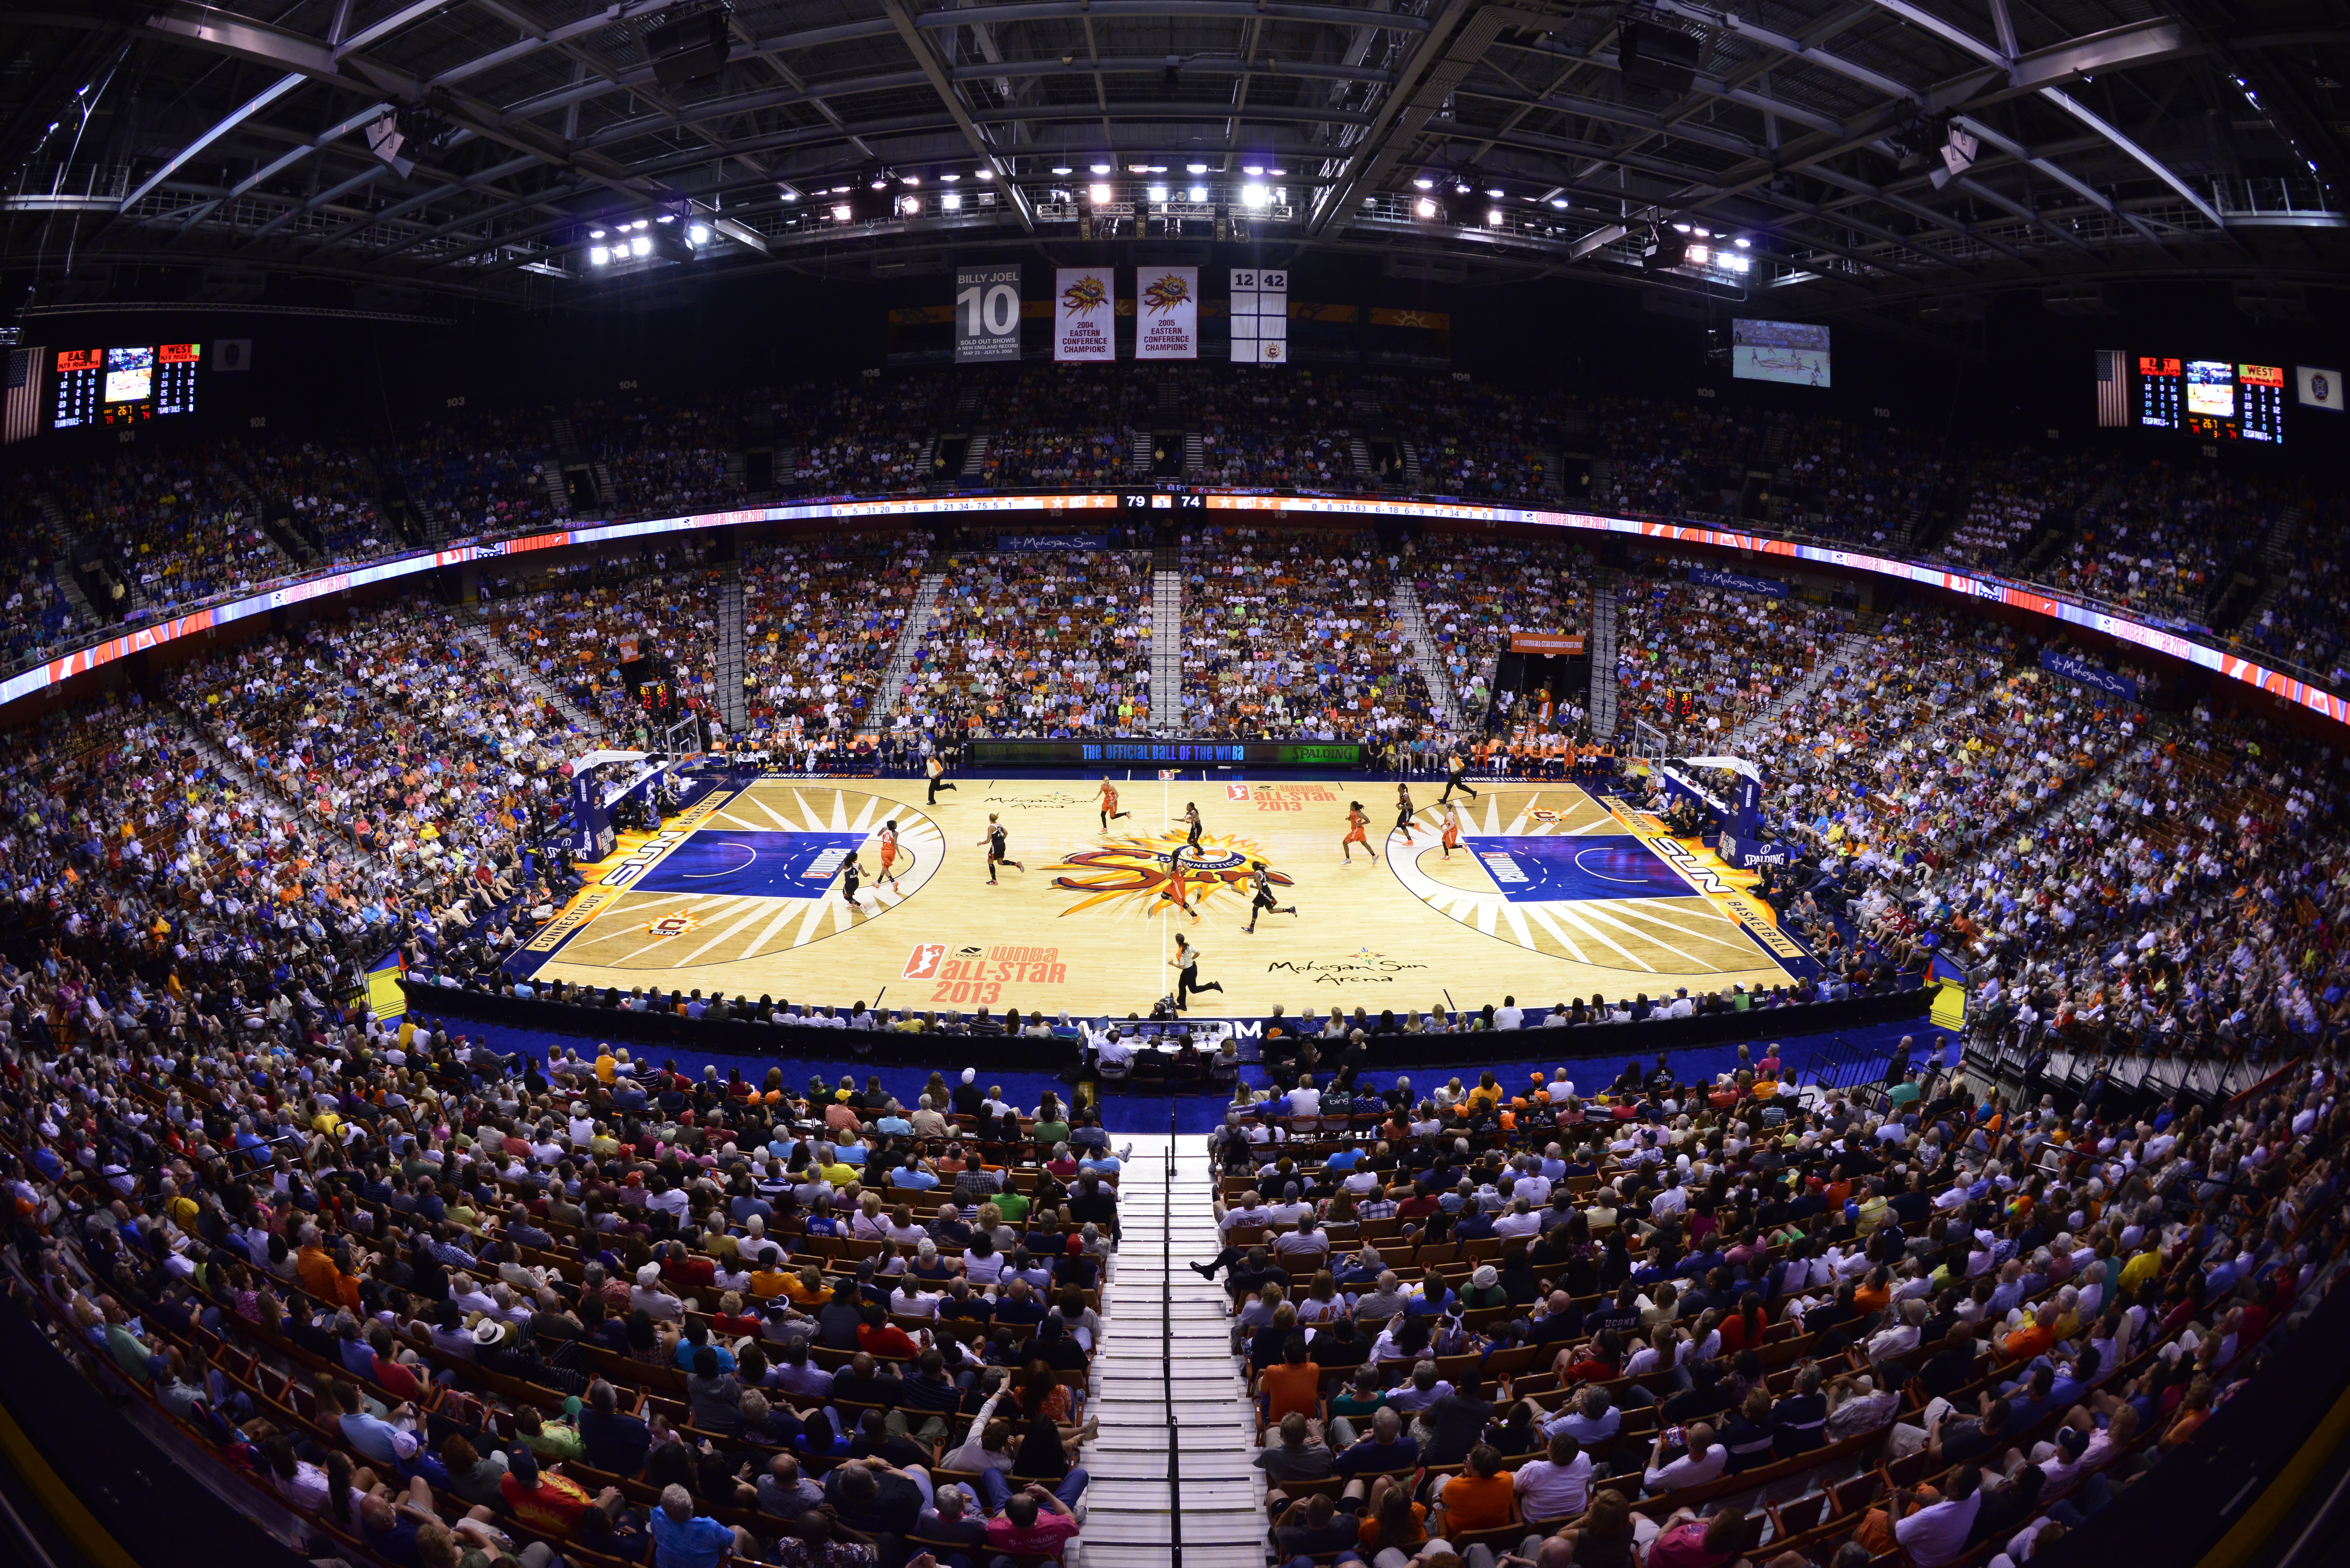 The WNBA Connecticut Sun has named a few doctors from UConn Health Orthopedics and Sports Medicine to be Team Physicians to care for the players on and off the basketball court (Copyright 2013 NBAE. Photo by David Dow/NBAE via Getty Images).